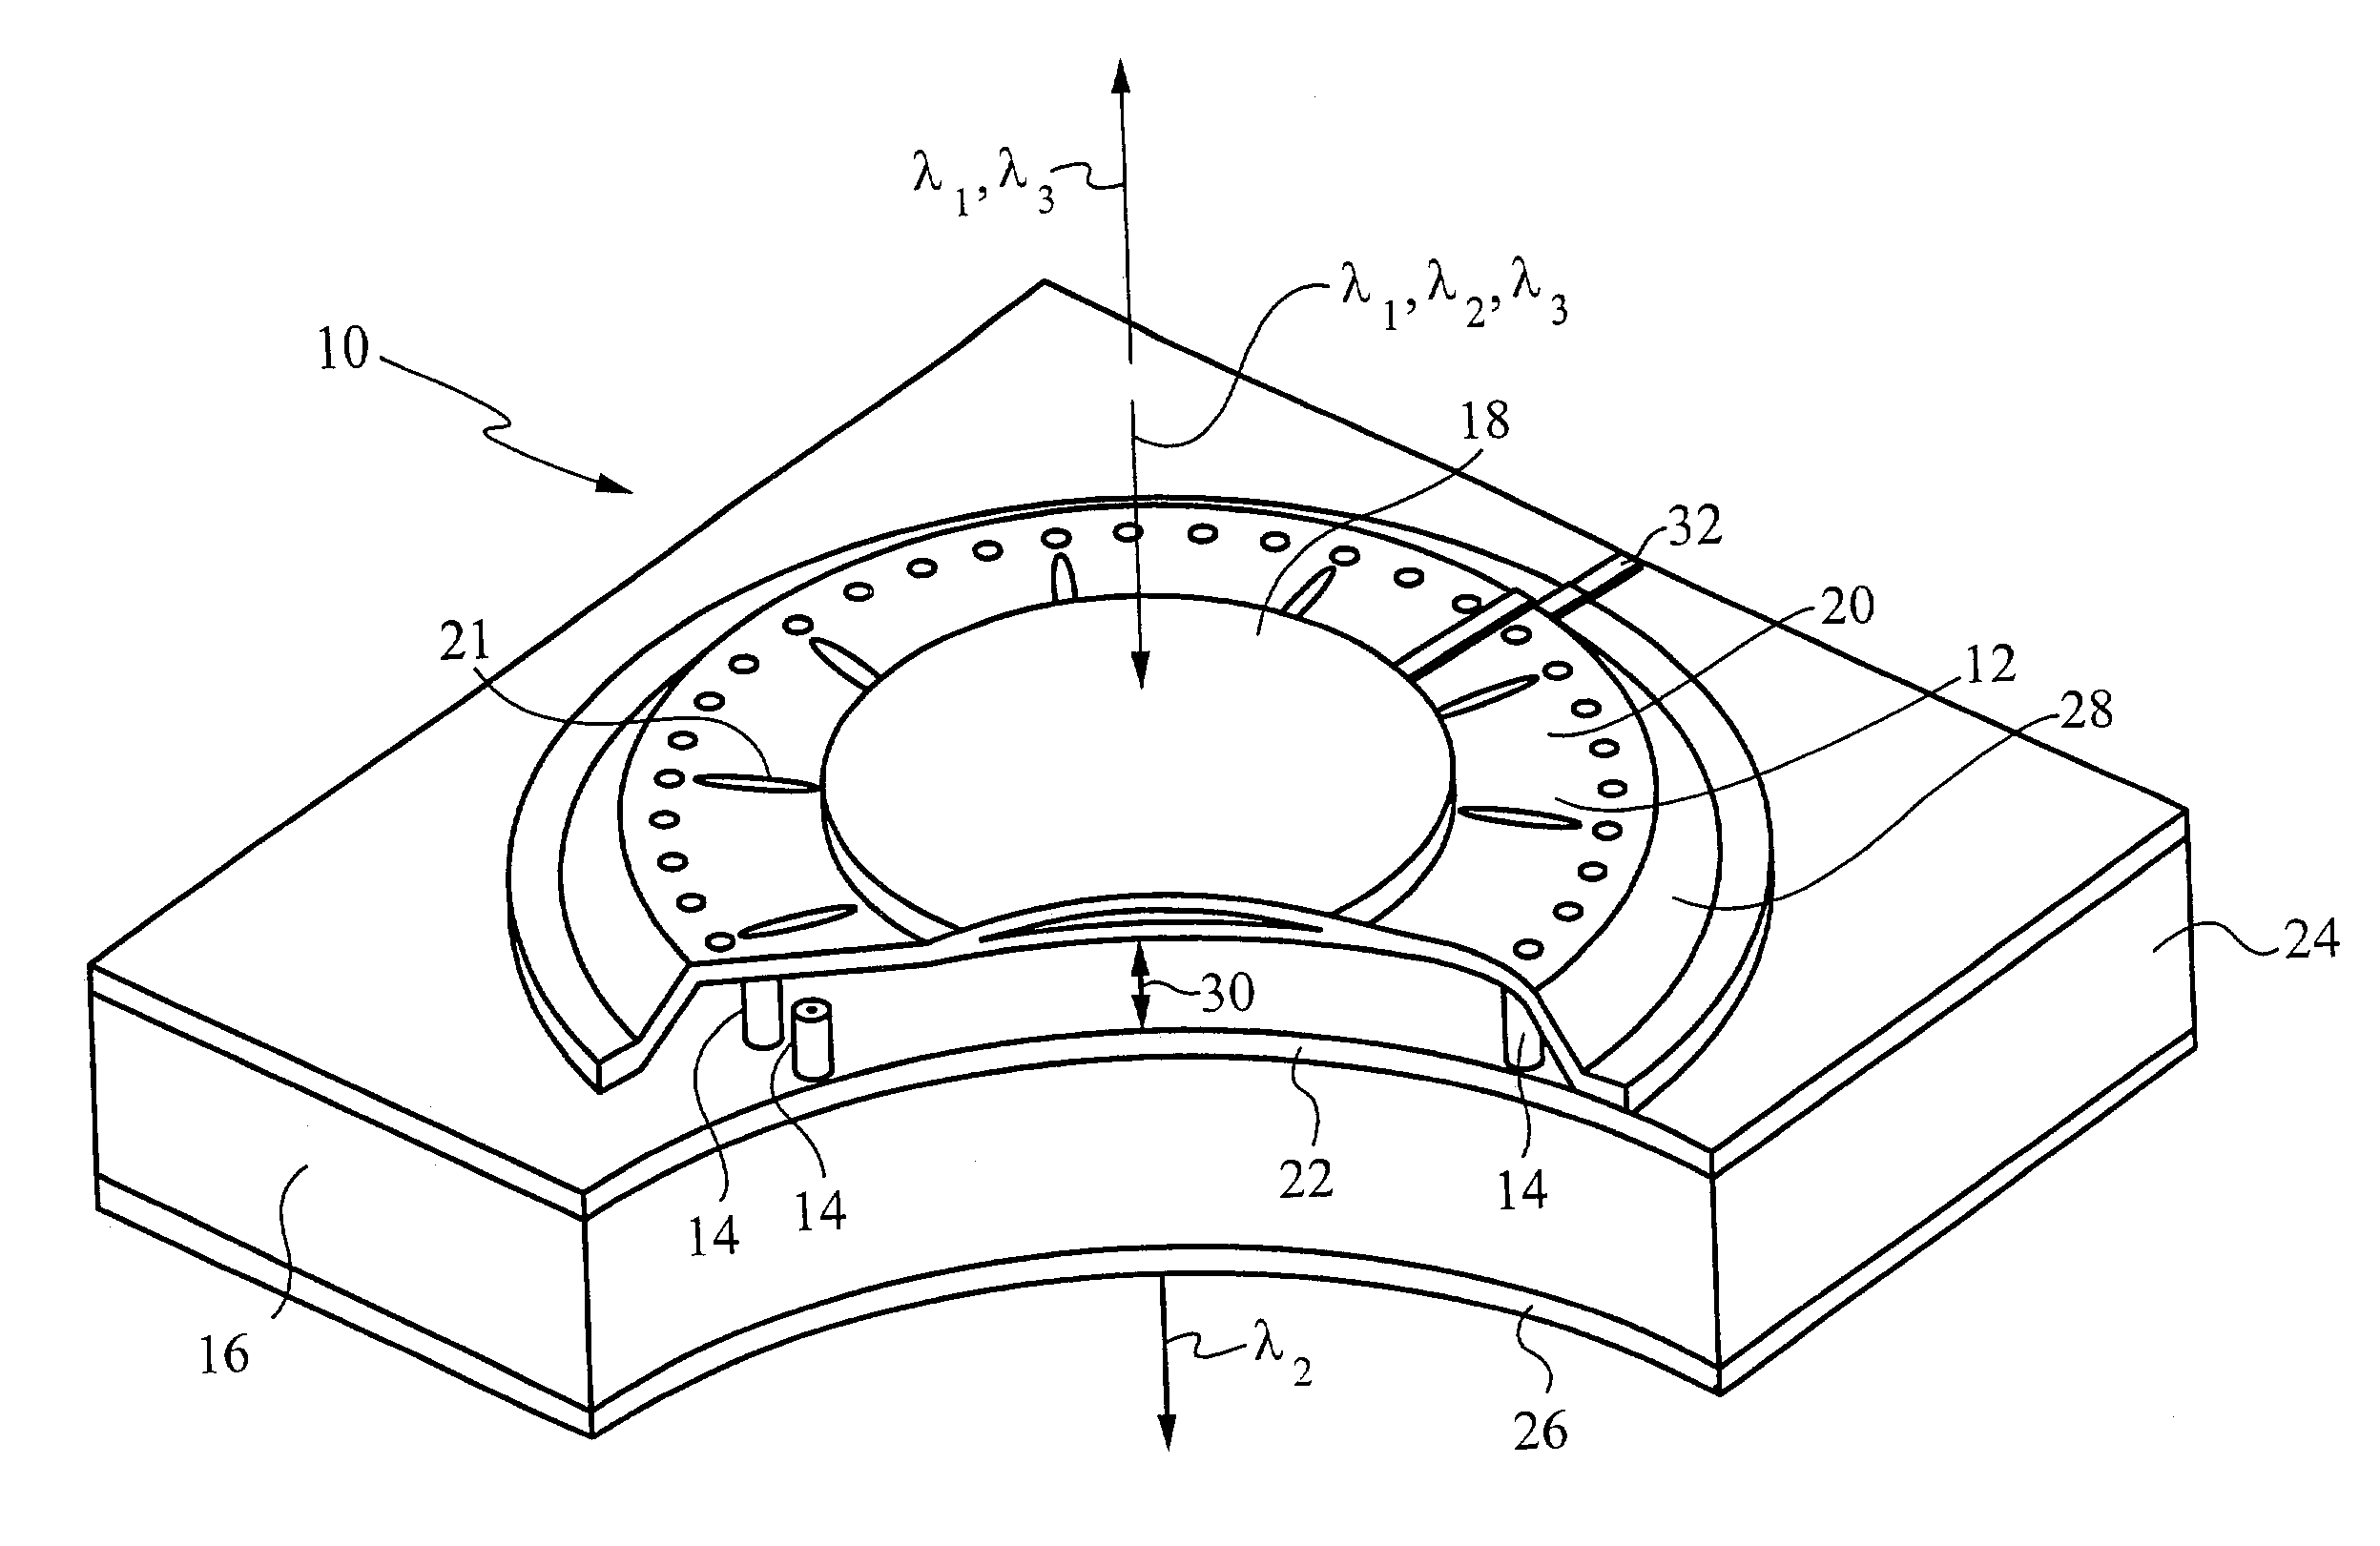 Fabry-Perot interferometer including membrane supported reflector